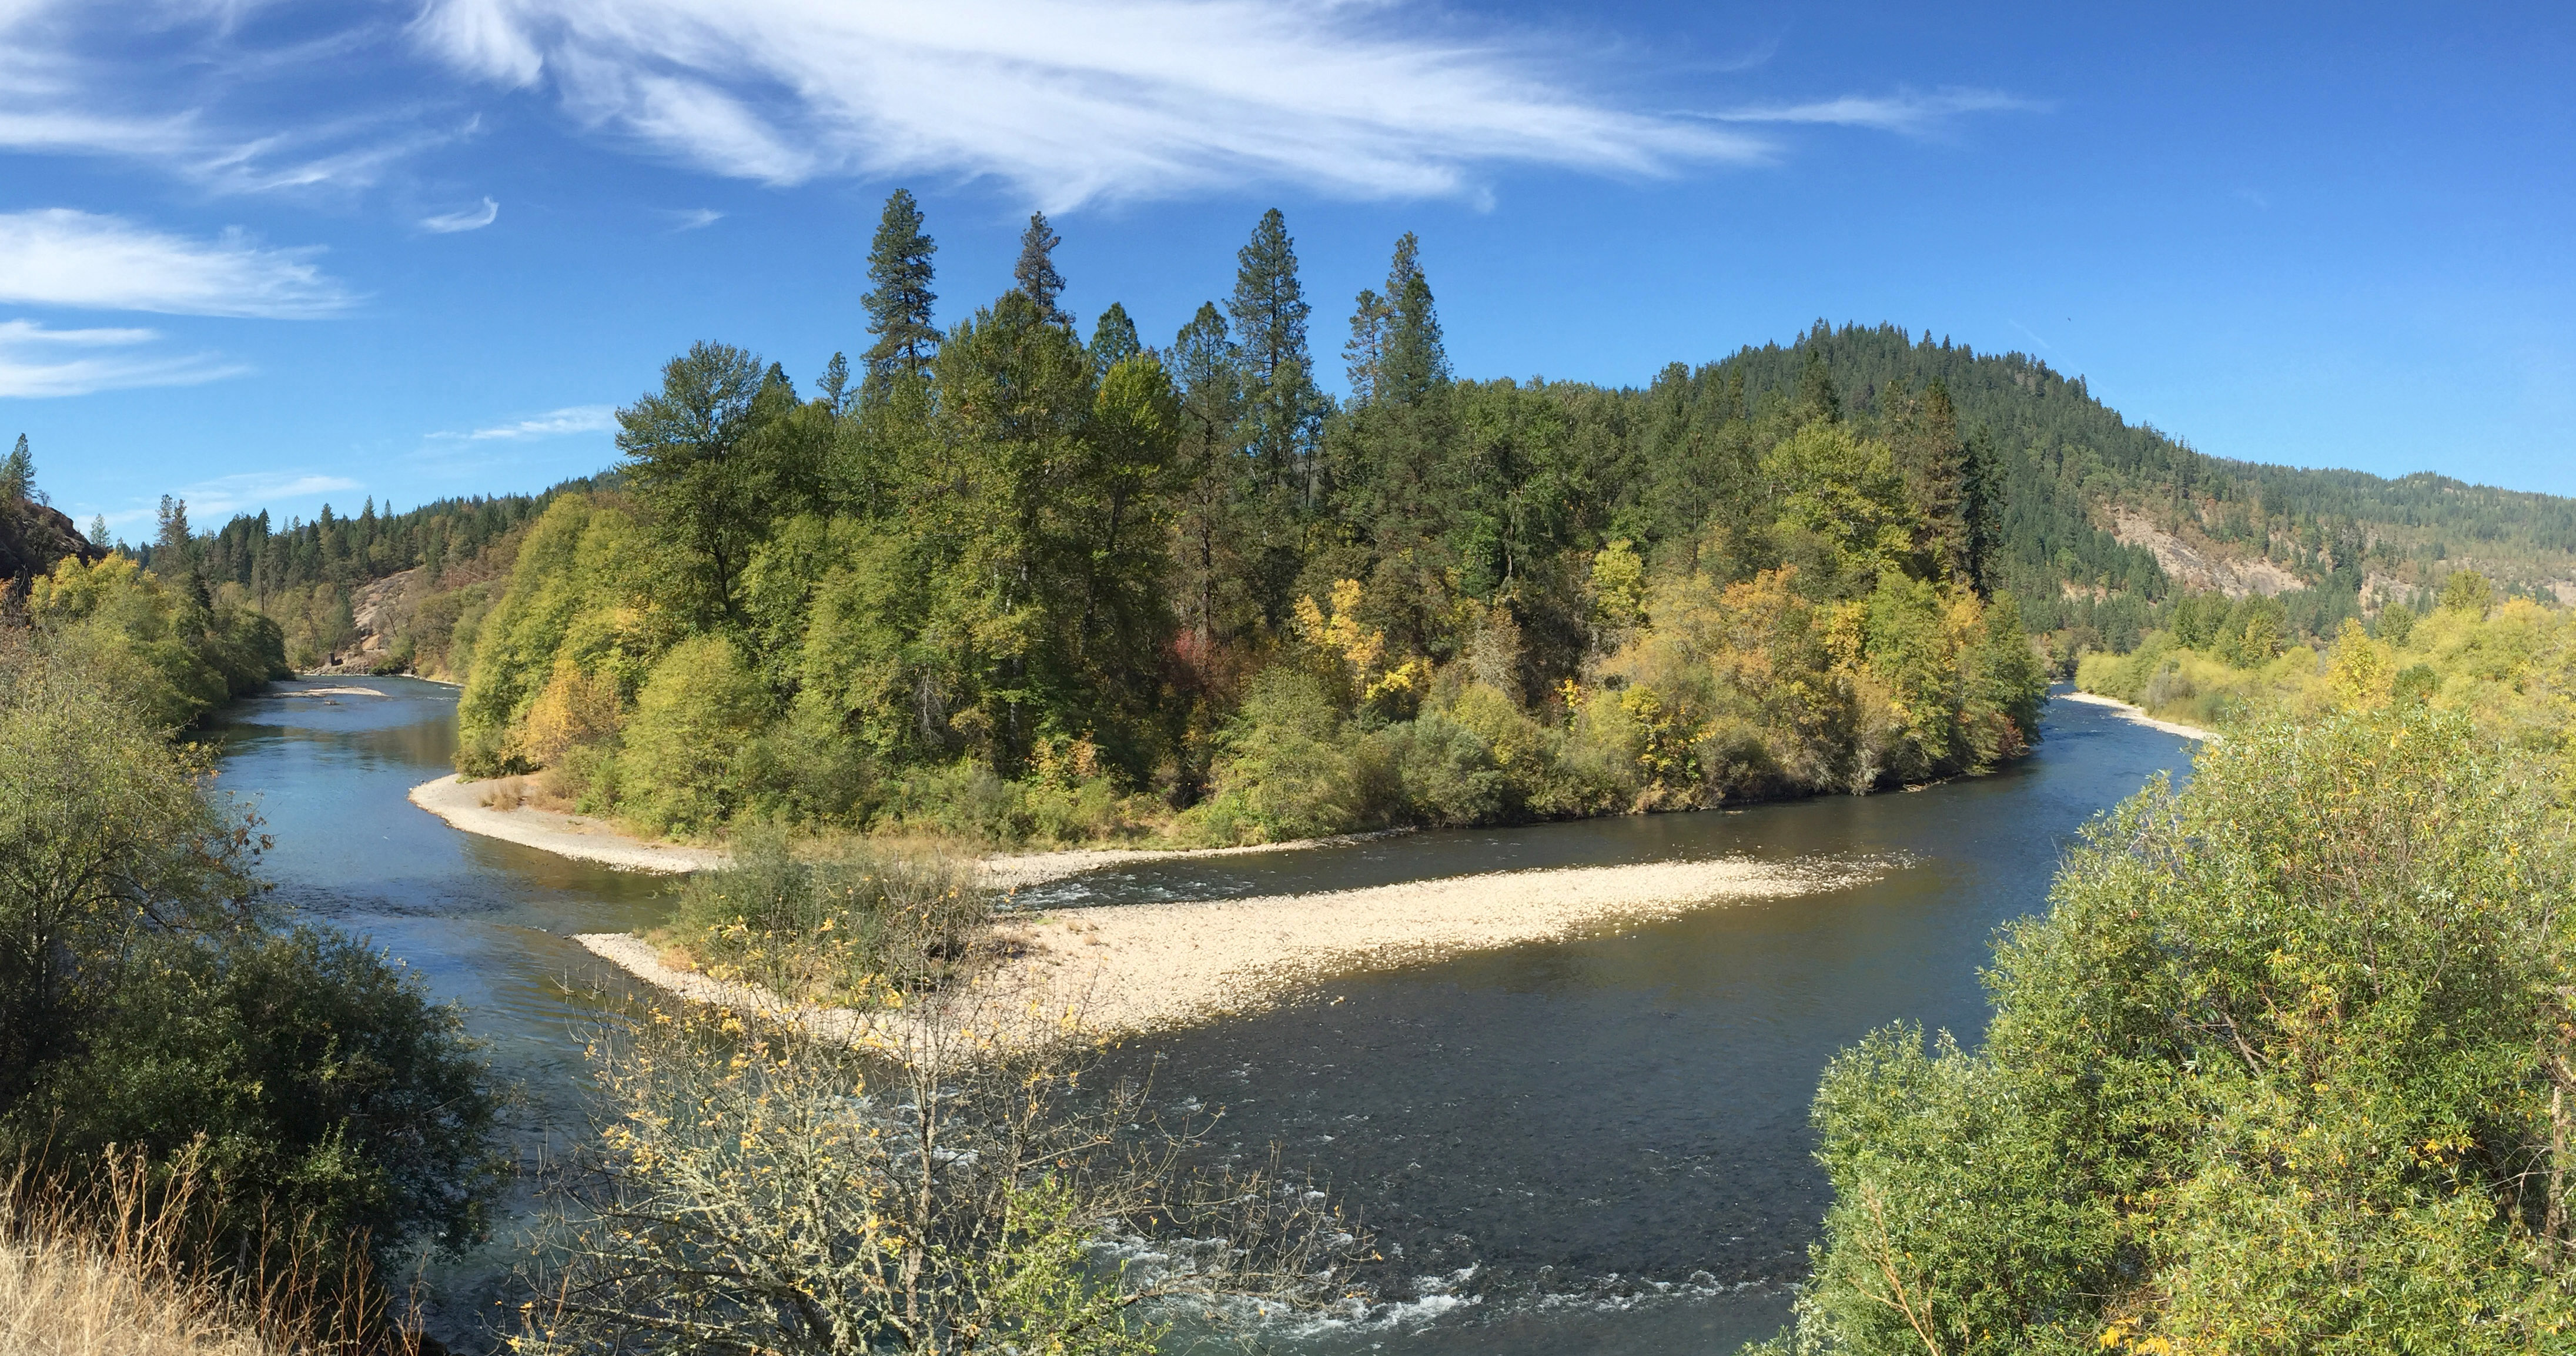 Recreation on the Rogue River